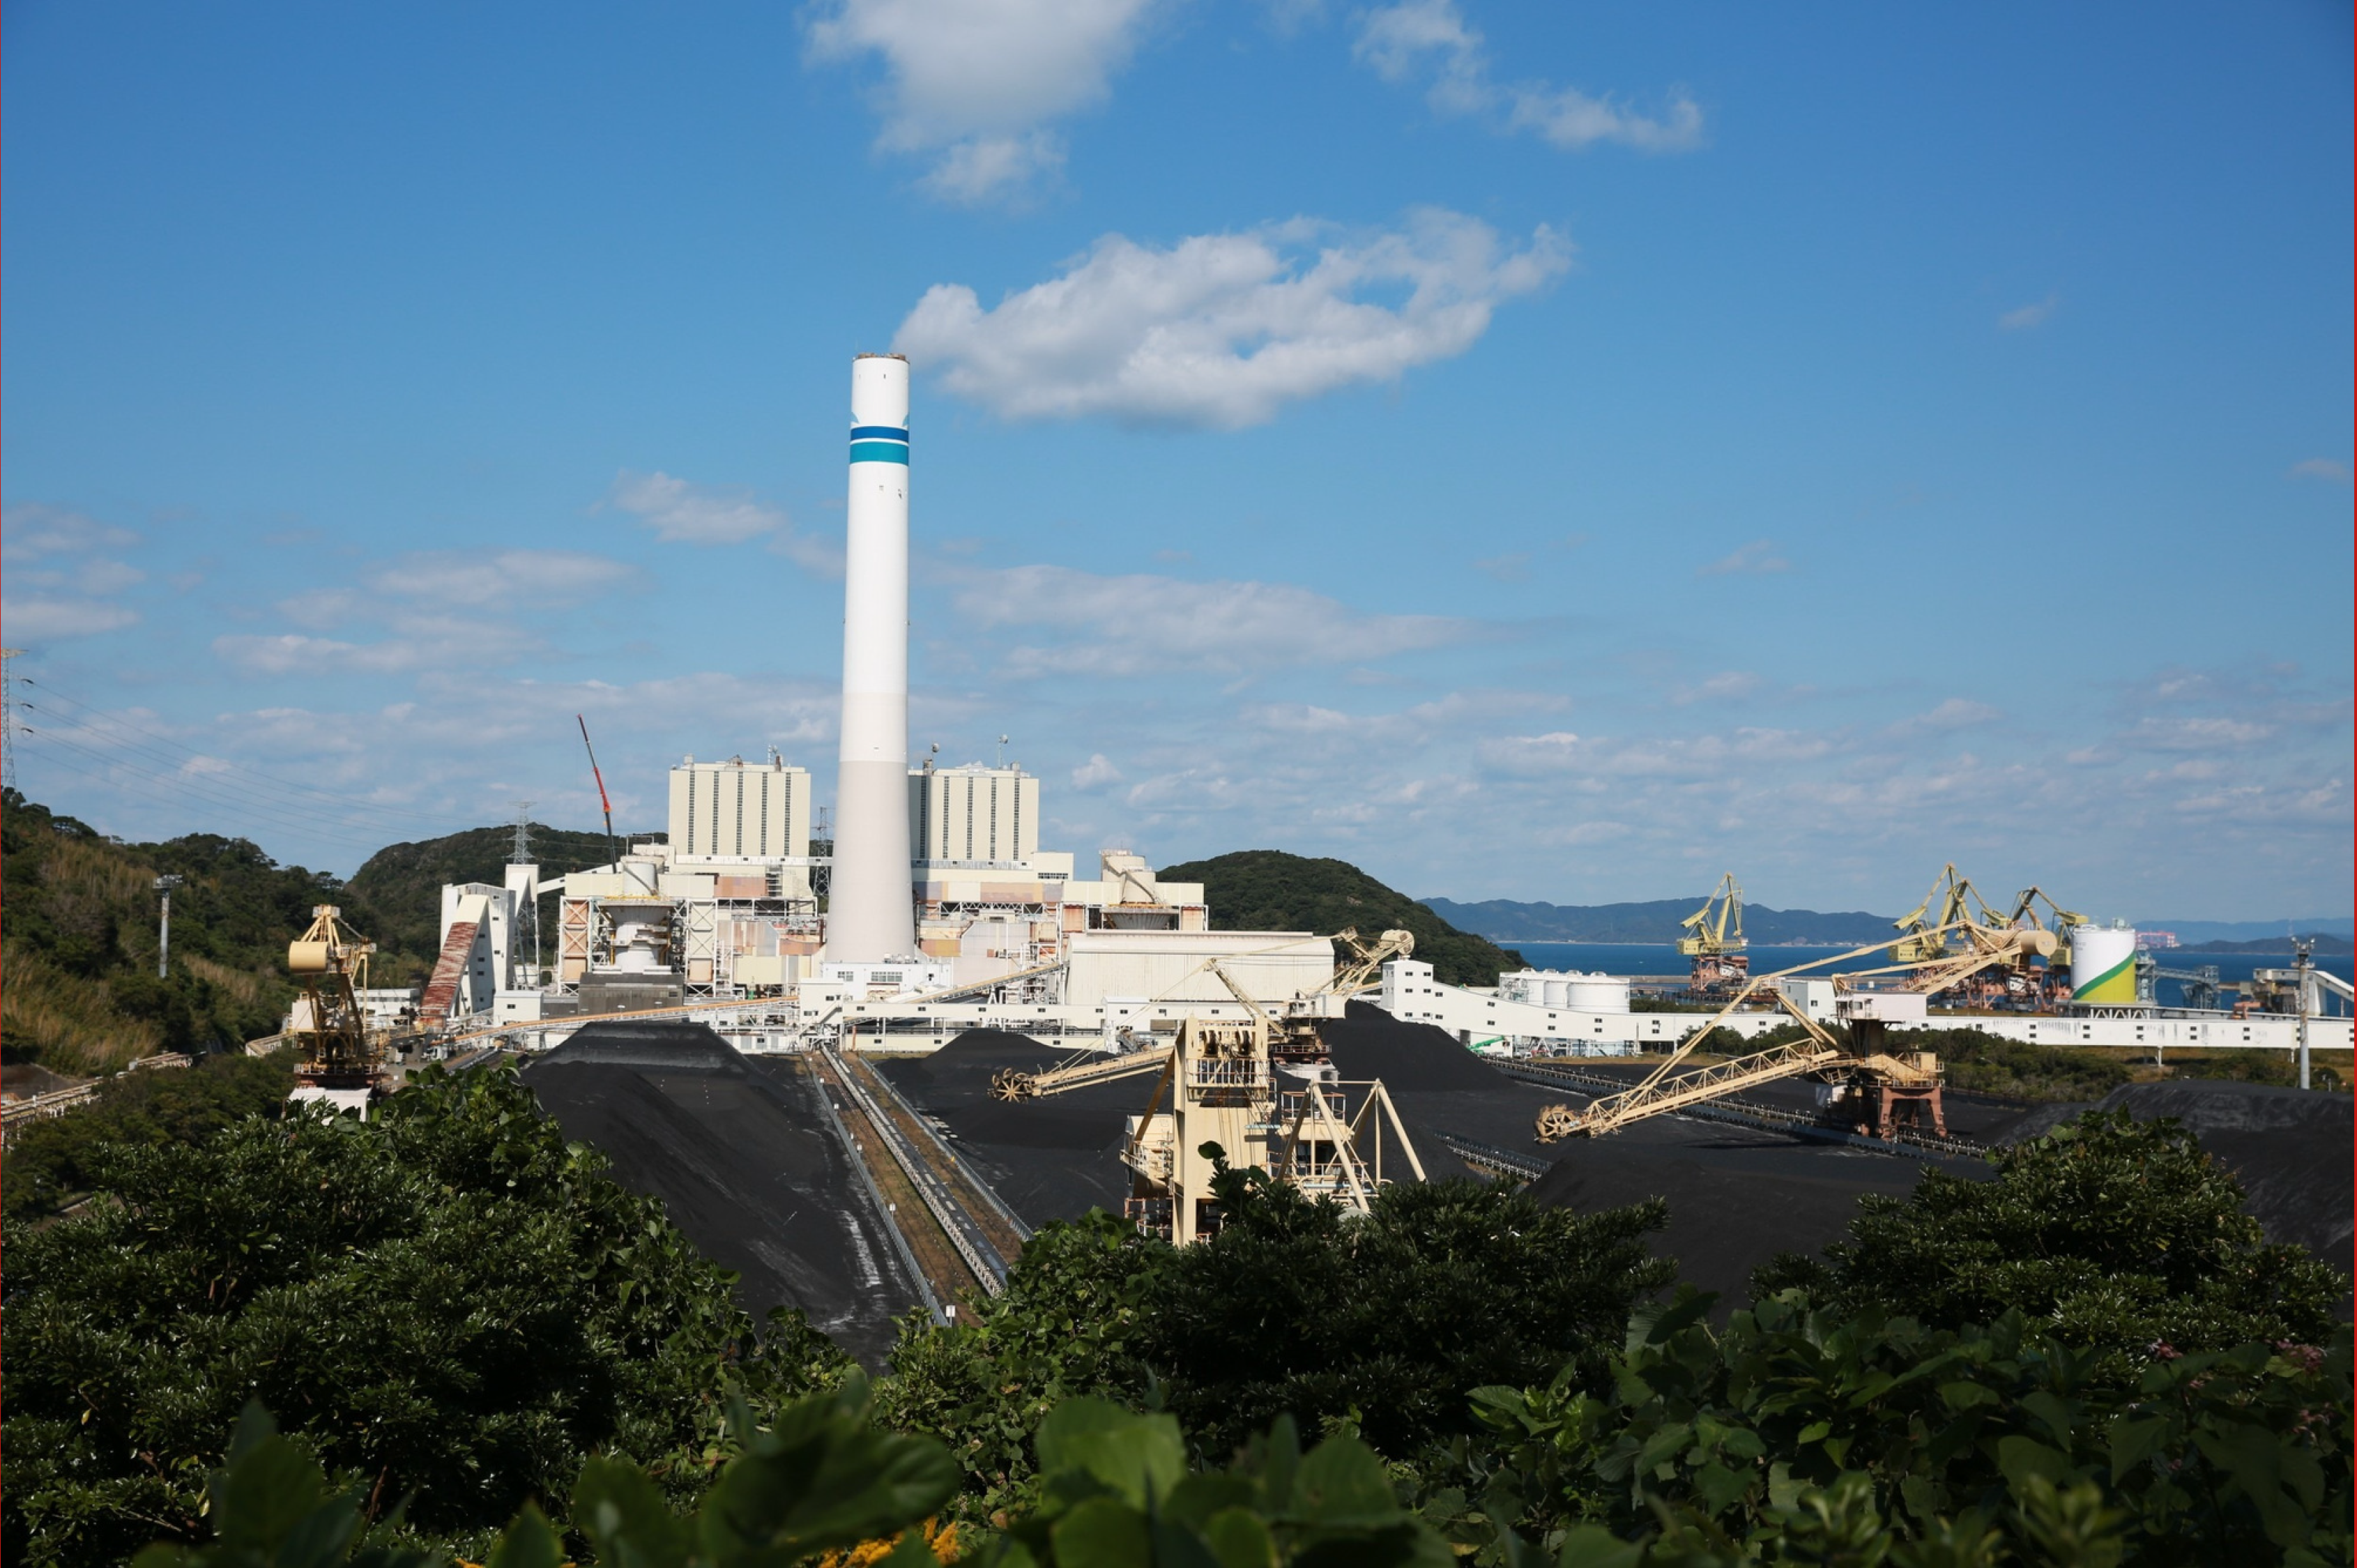 【News】GENESIS Matsushima Project: Citizens’ voices ignored in response to public comments